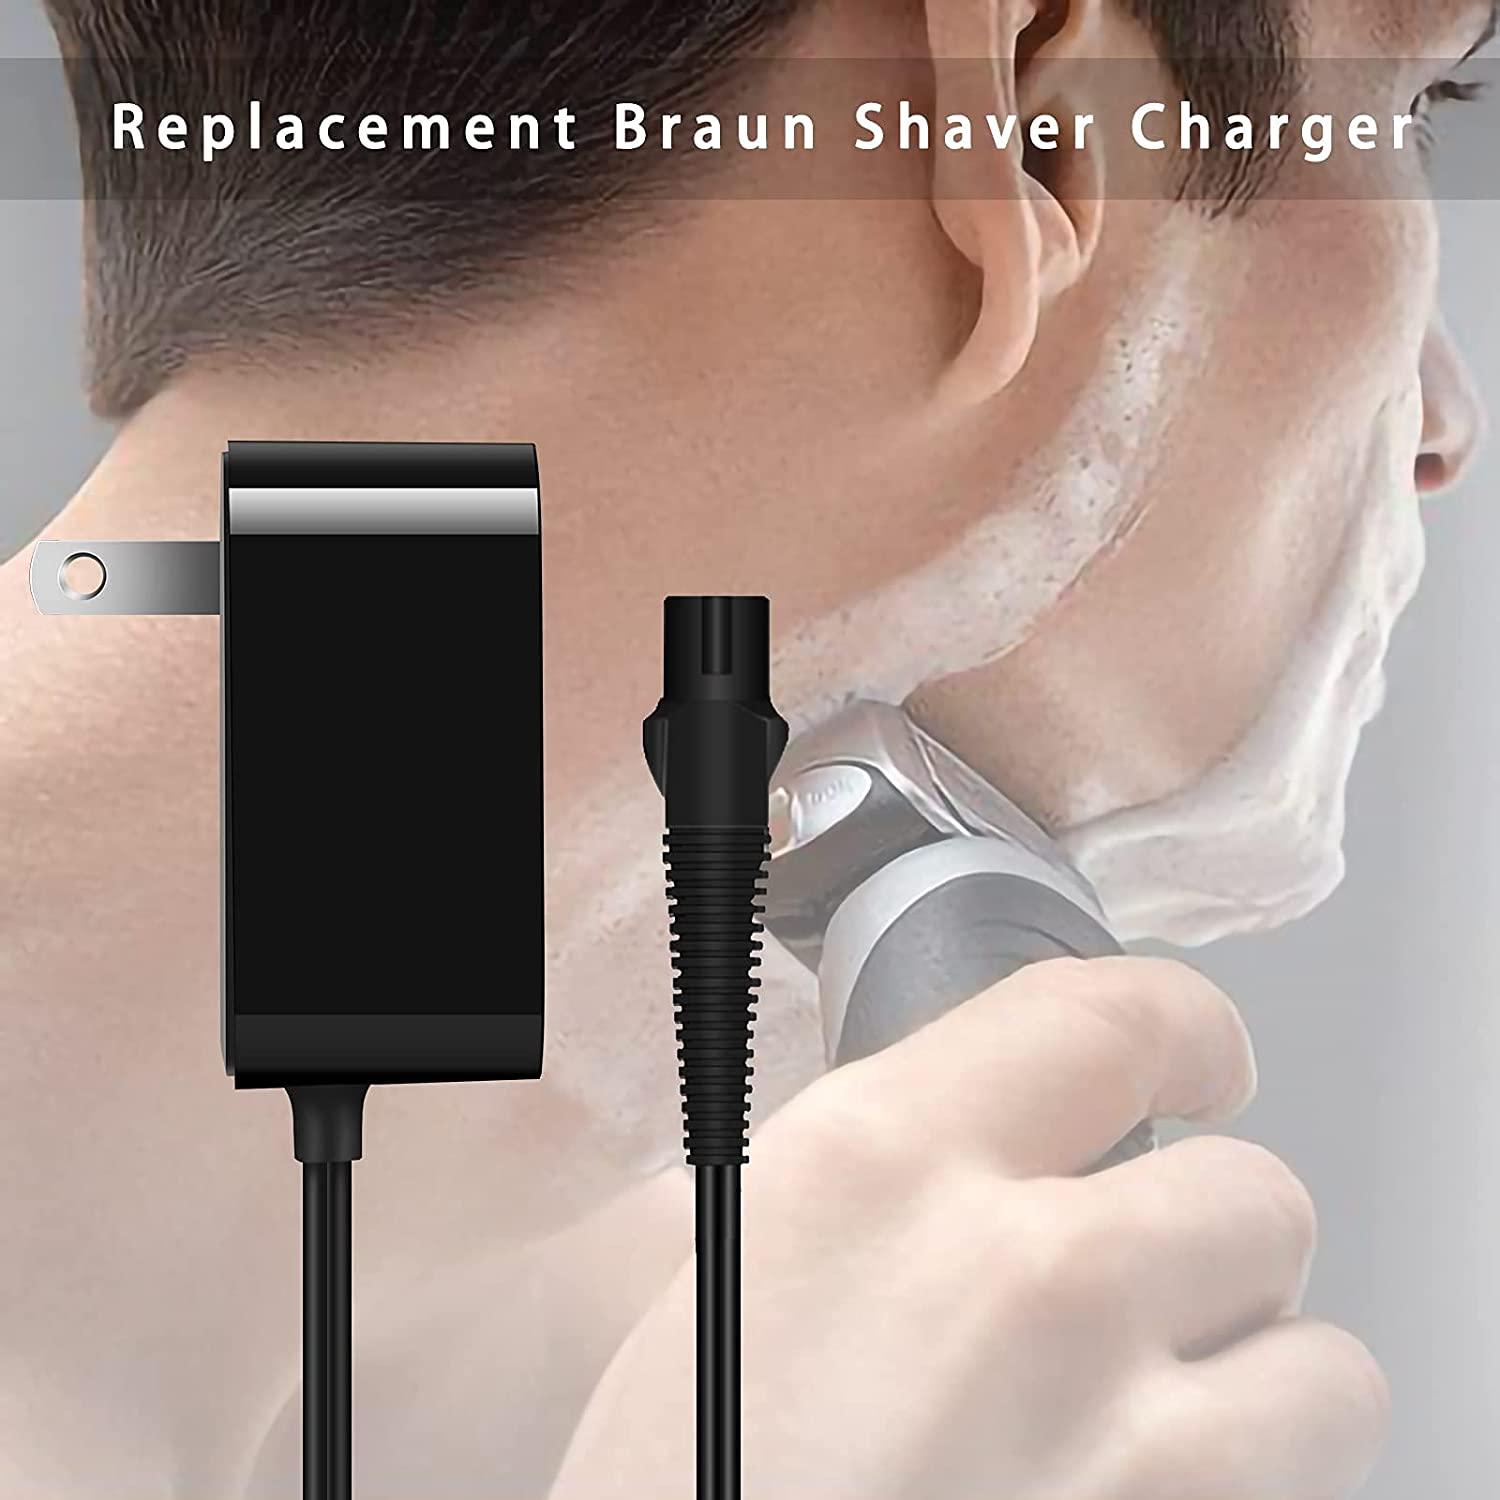 USB Cable 12v Braun Shavers Charger adapter Power For S3 3000 3010S 3020S  3030S 3040S 3050S 3060S 3070S 3080S Electric Razors